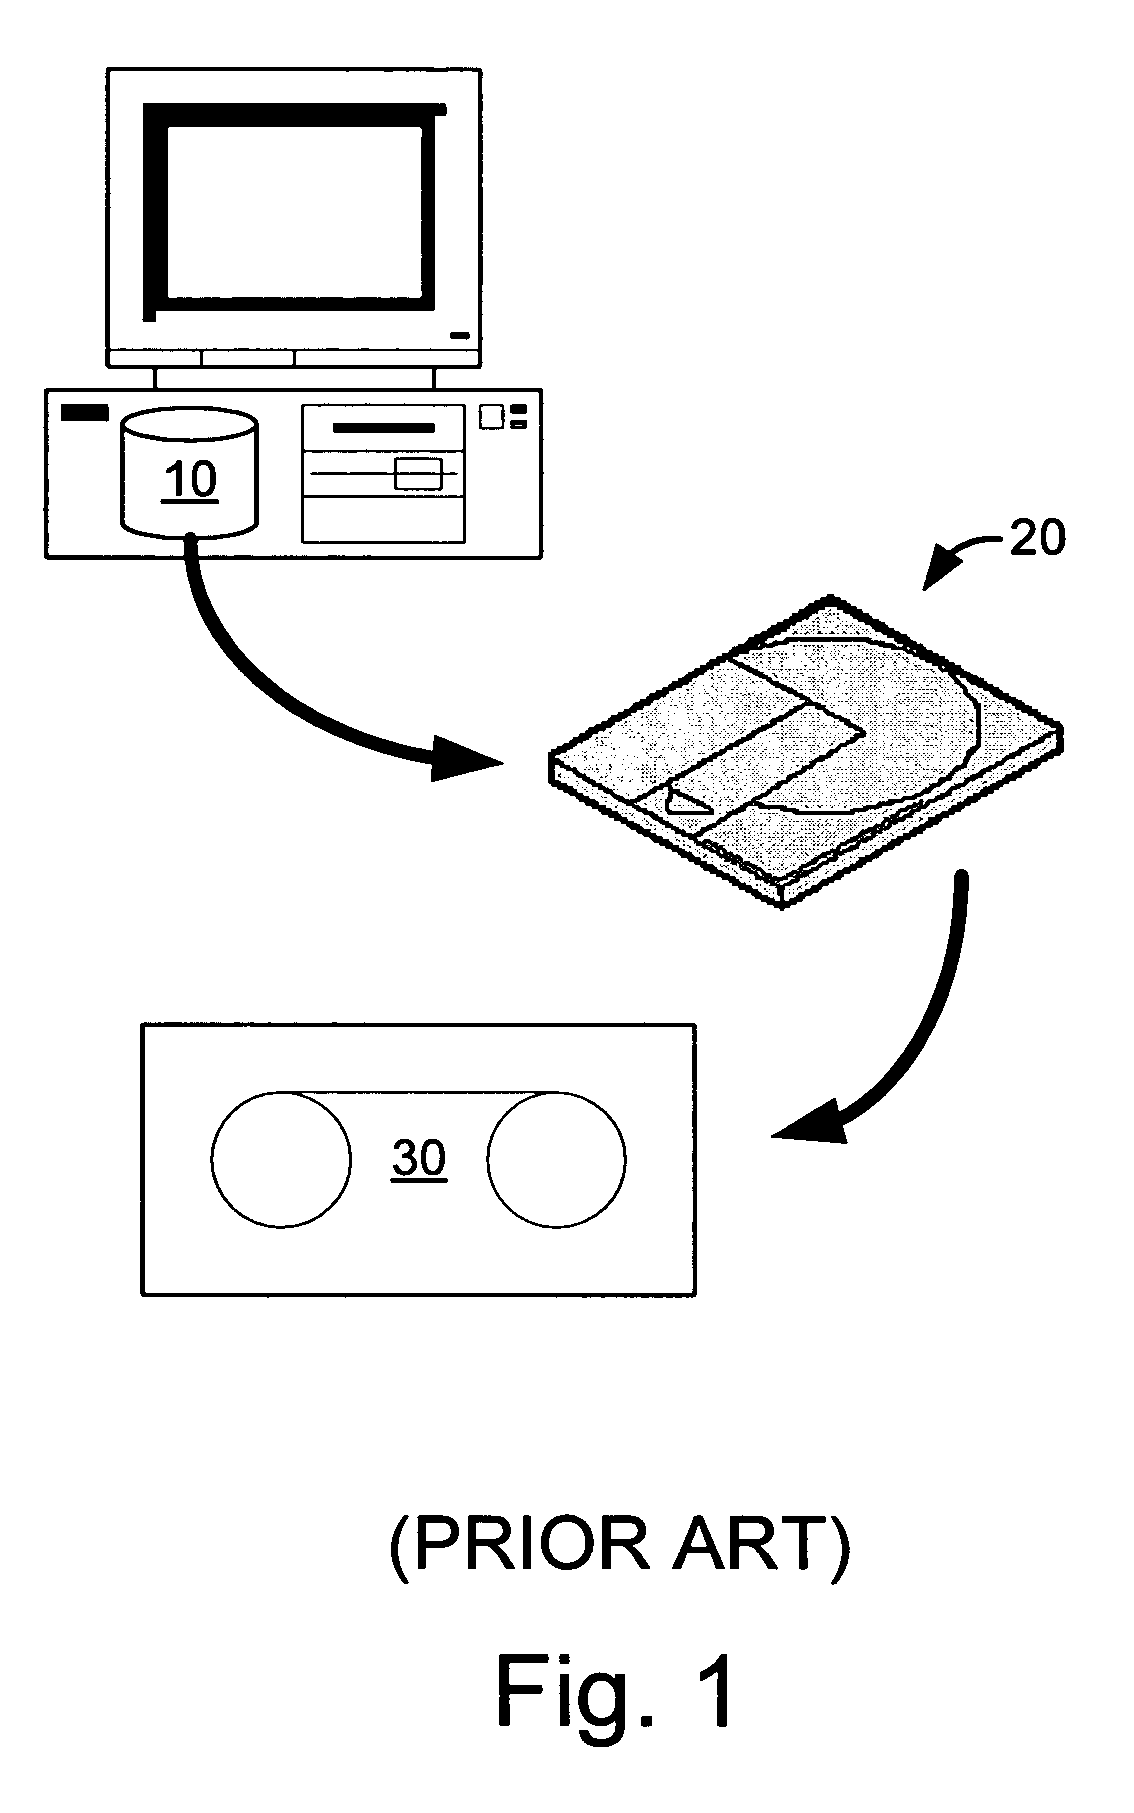 Systems and methods for performing storage operations using network attached storage